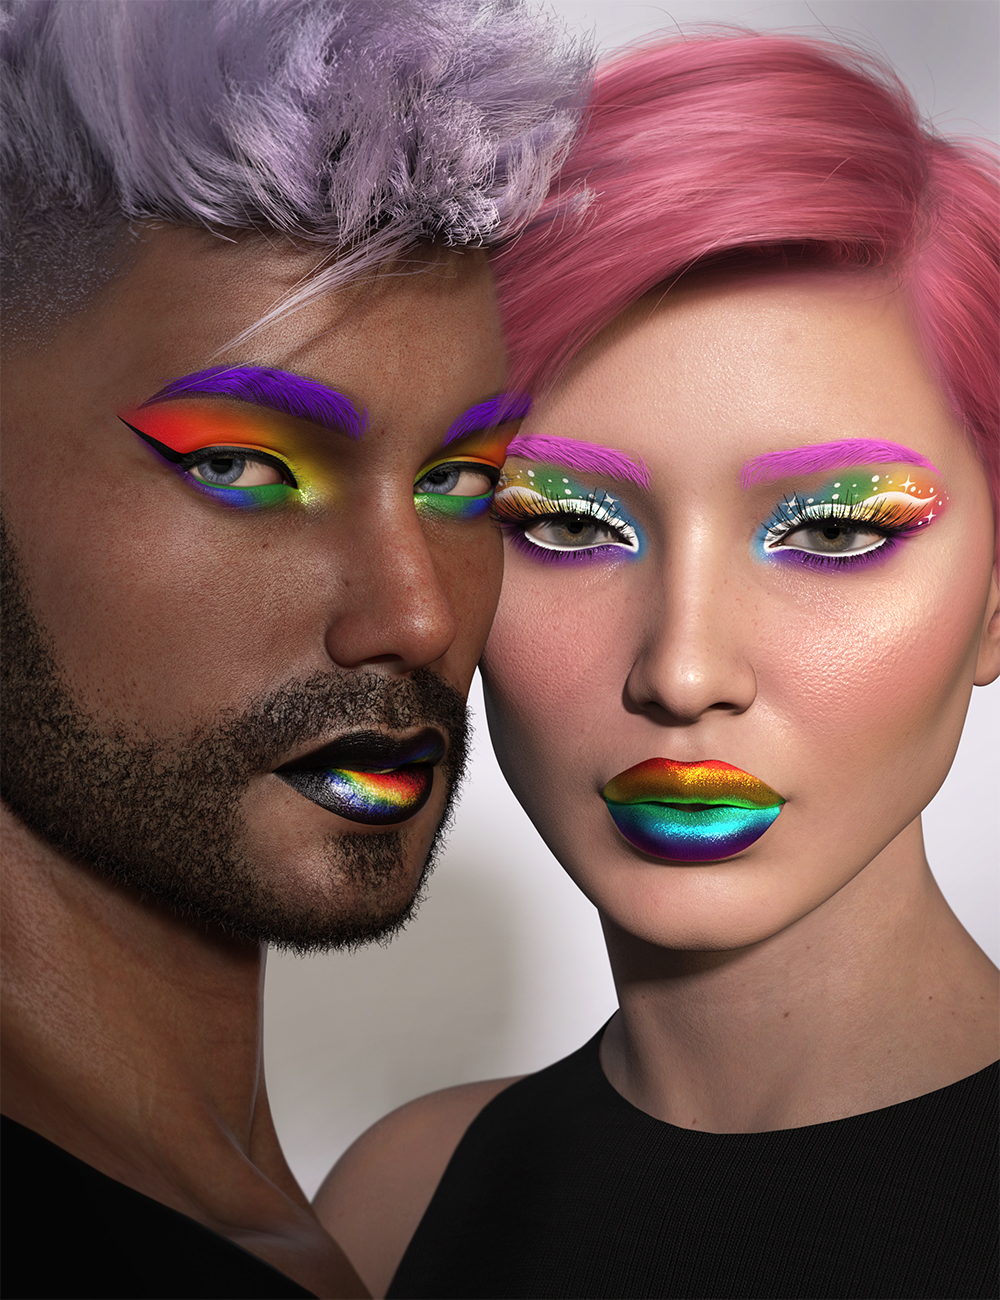 Prisma Makeup L.I.E. for Genesis 8.1 Females and Males